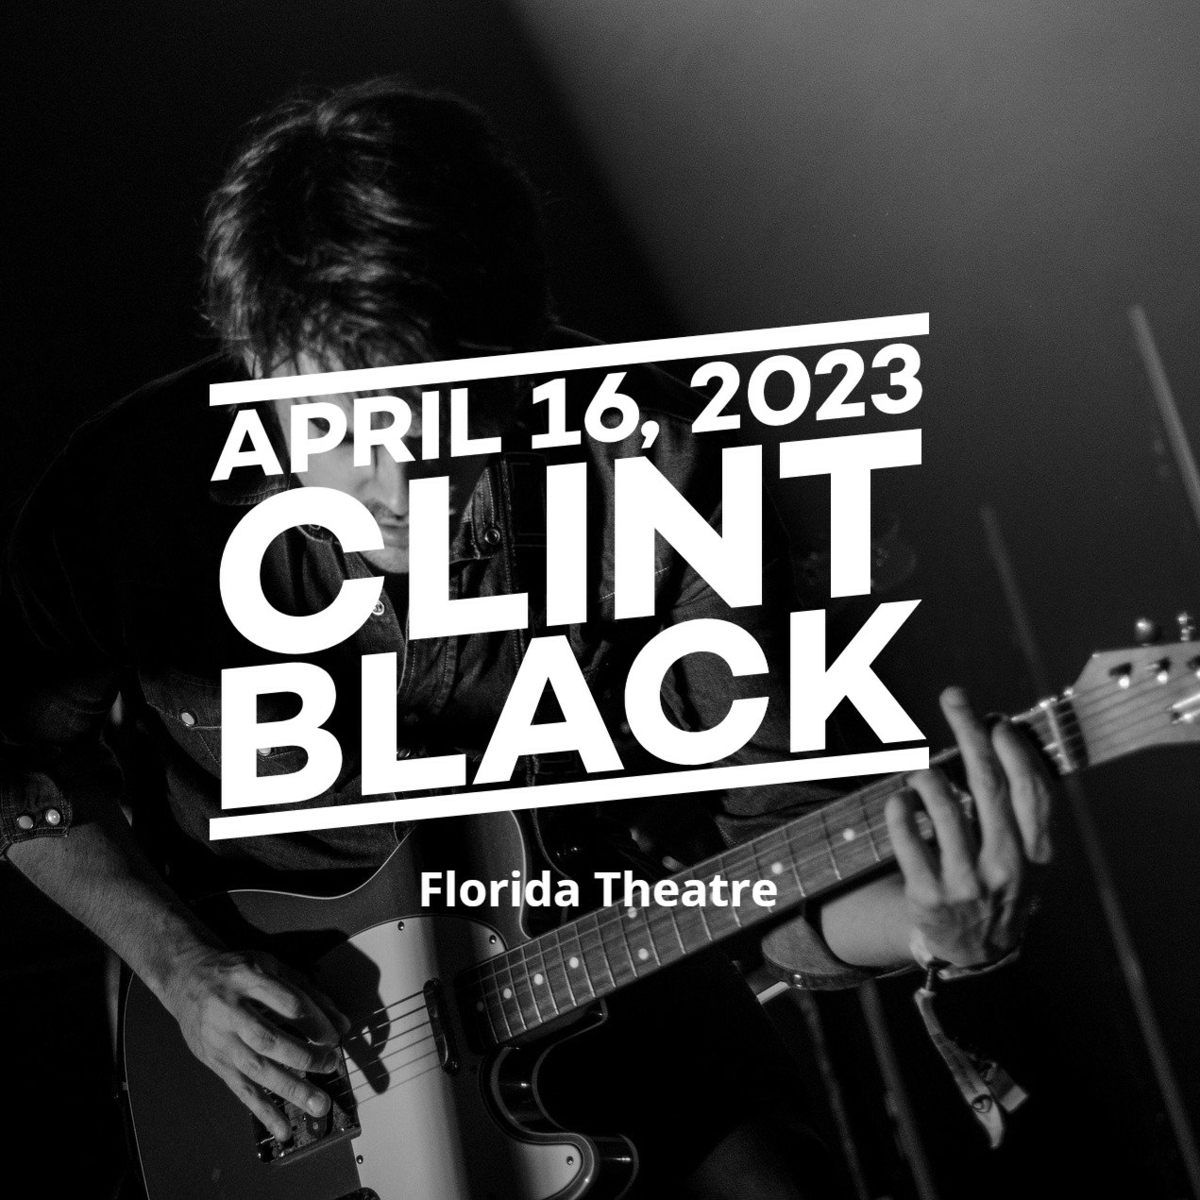 None other than country music star #ClintBlack, will be taking the stage at Florida Theatre on April 16th, so break out your cowboy boots and reserve your seats at  bit.ly/3YVJB16. You'll be 'Killin Time' in a memorable way! #jacksonvilleFL